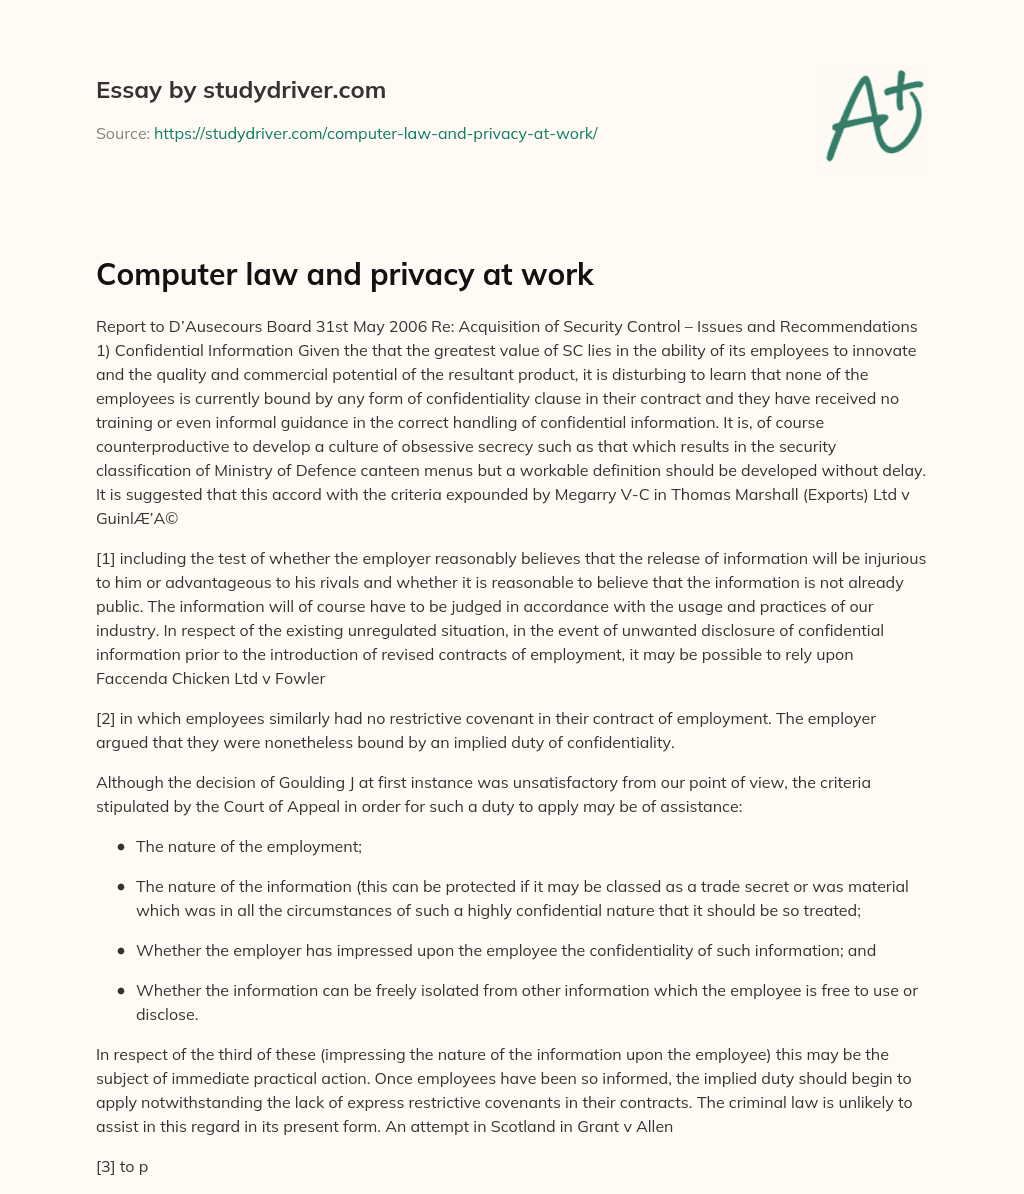 Computer Law and Privacy at Work essay